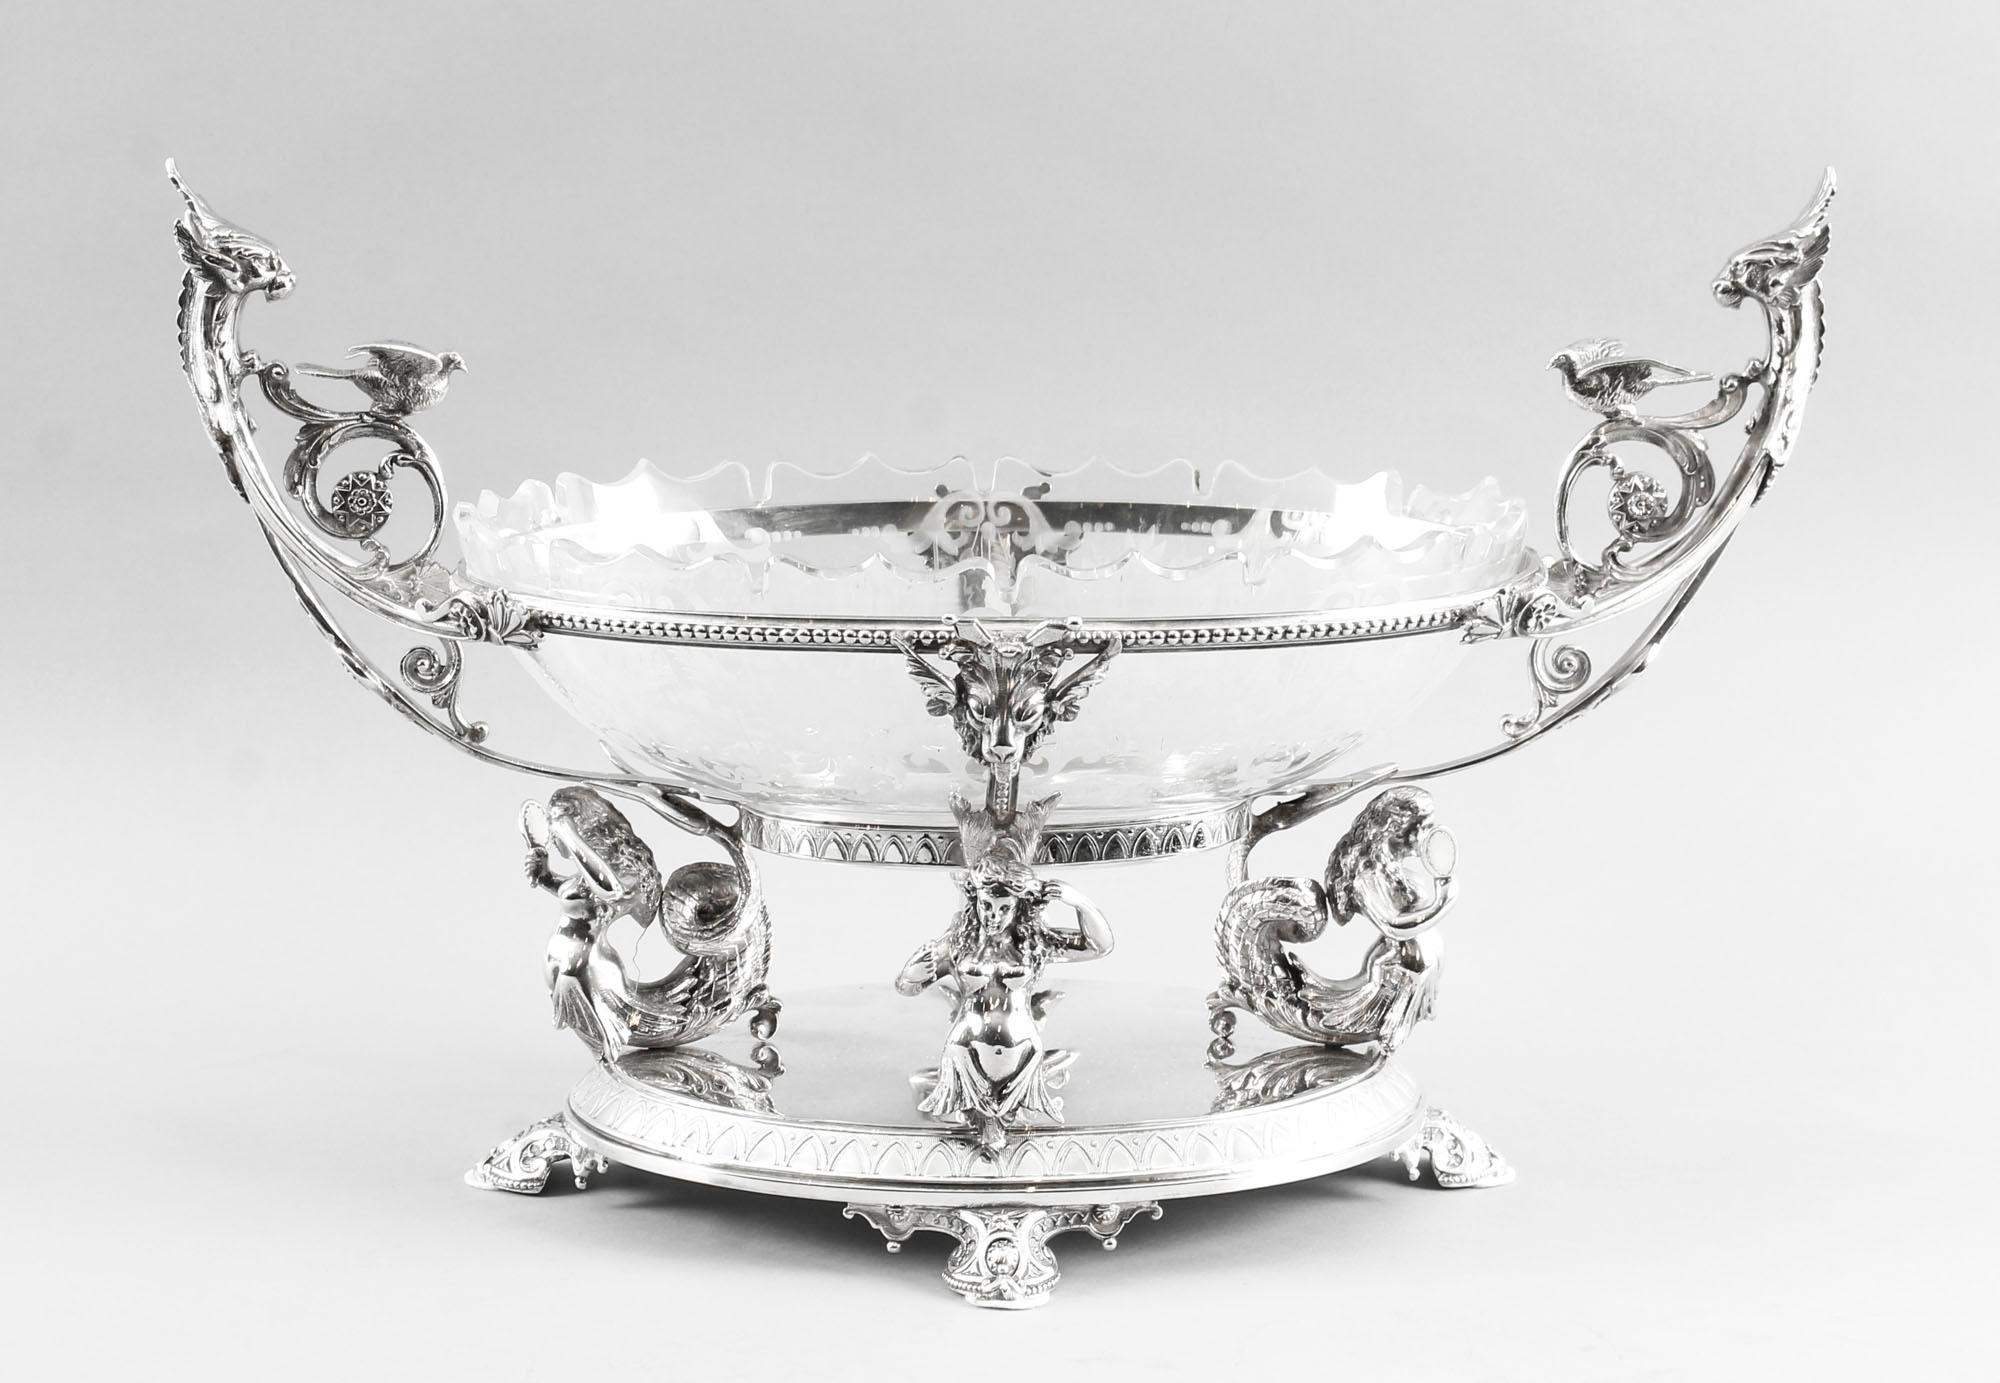 This is an intricate and exquisitely made antique silver-plated Victorian centrepiece by the renowned silversmith, Henry Wilkinson & Co, circa 1870 in date.
This stunning centrepiece has a central oval glass dish which is beautifully engraved and